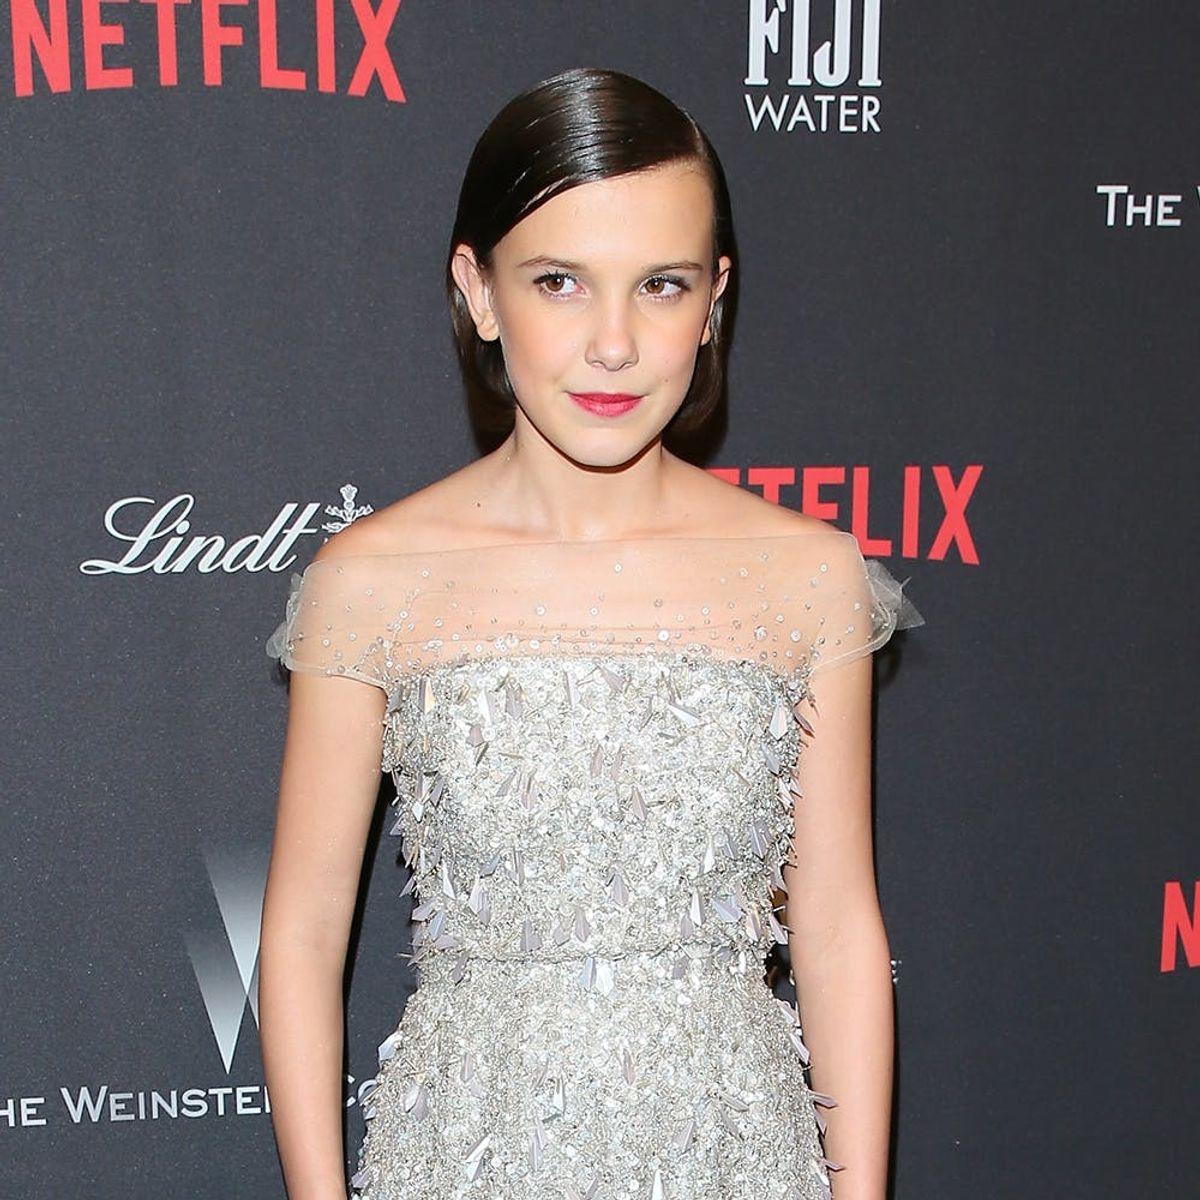 Millie Bobby Brown Is Becoming a Full-Fledged Fashion Star